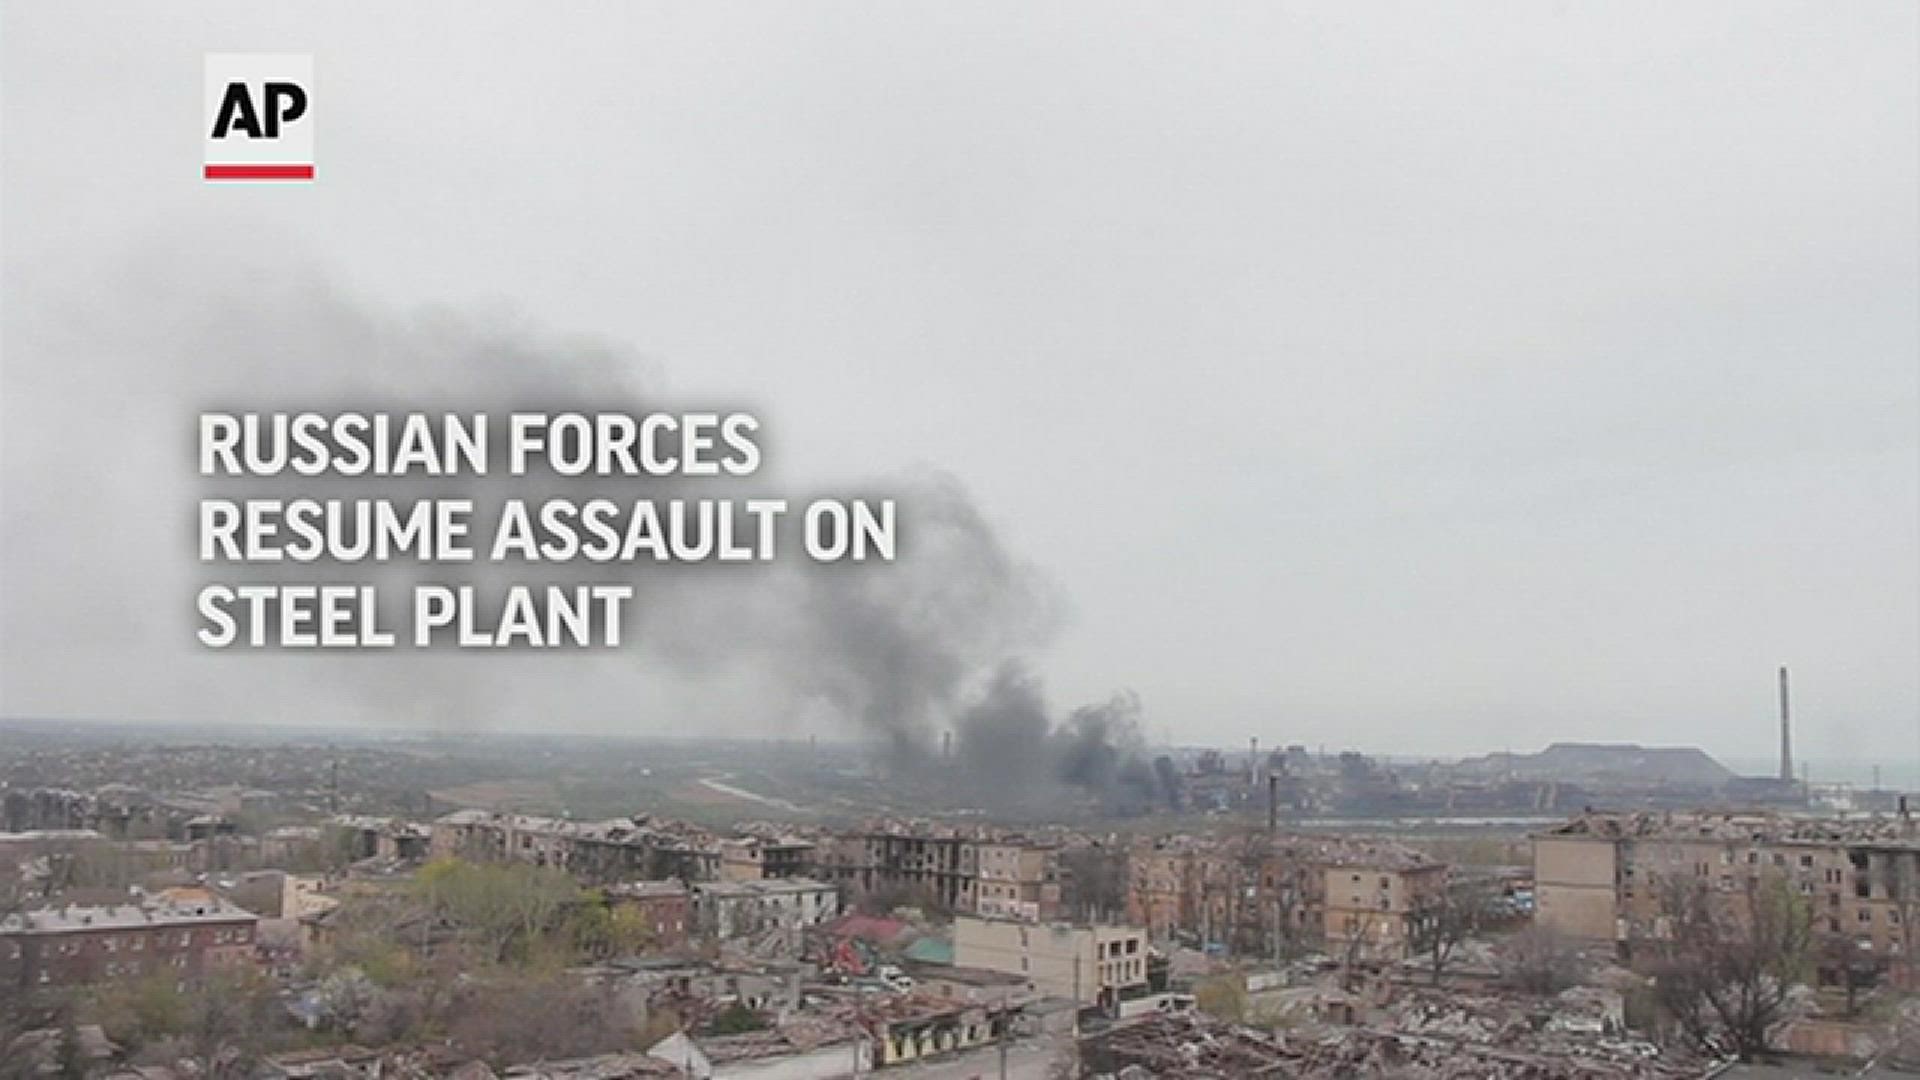 Russian forces on Tuesday resumed an assault on the Azovstal steel plant, thought to be the last bastion of a Ukrainian regiment in the besieged city of Mariupol.